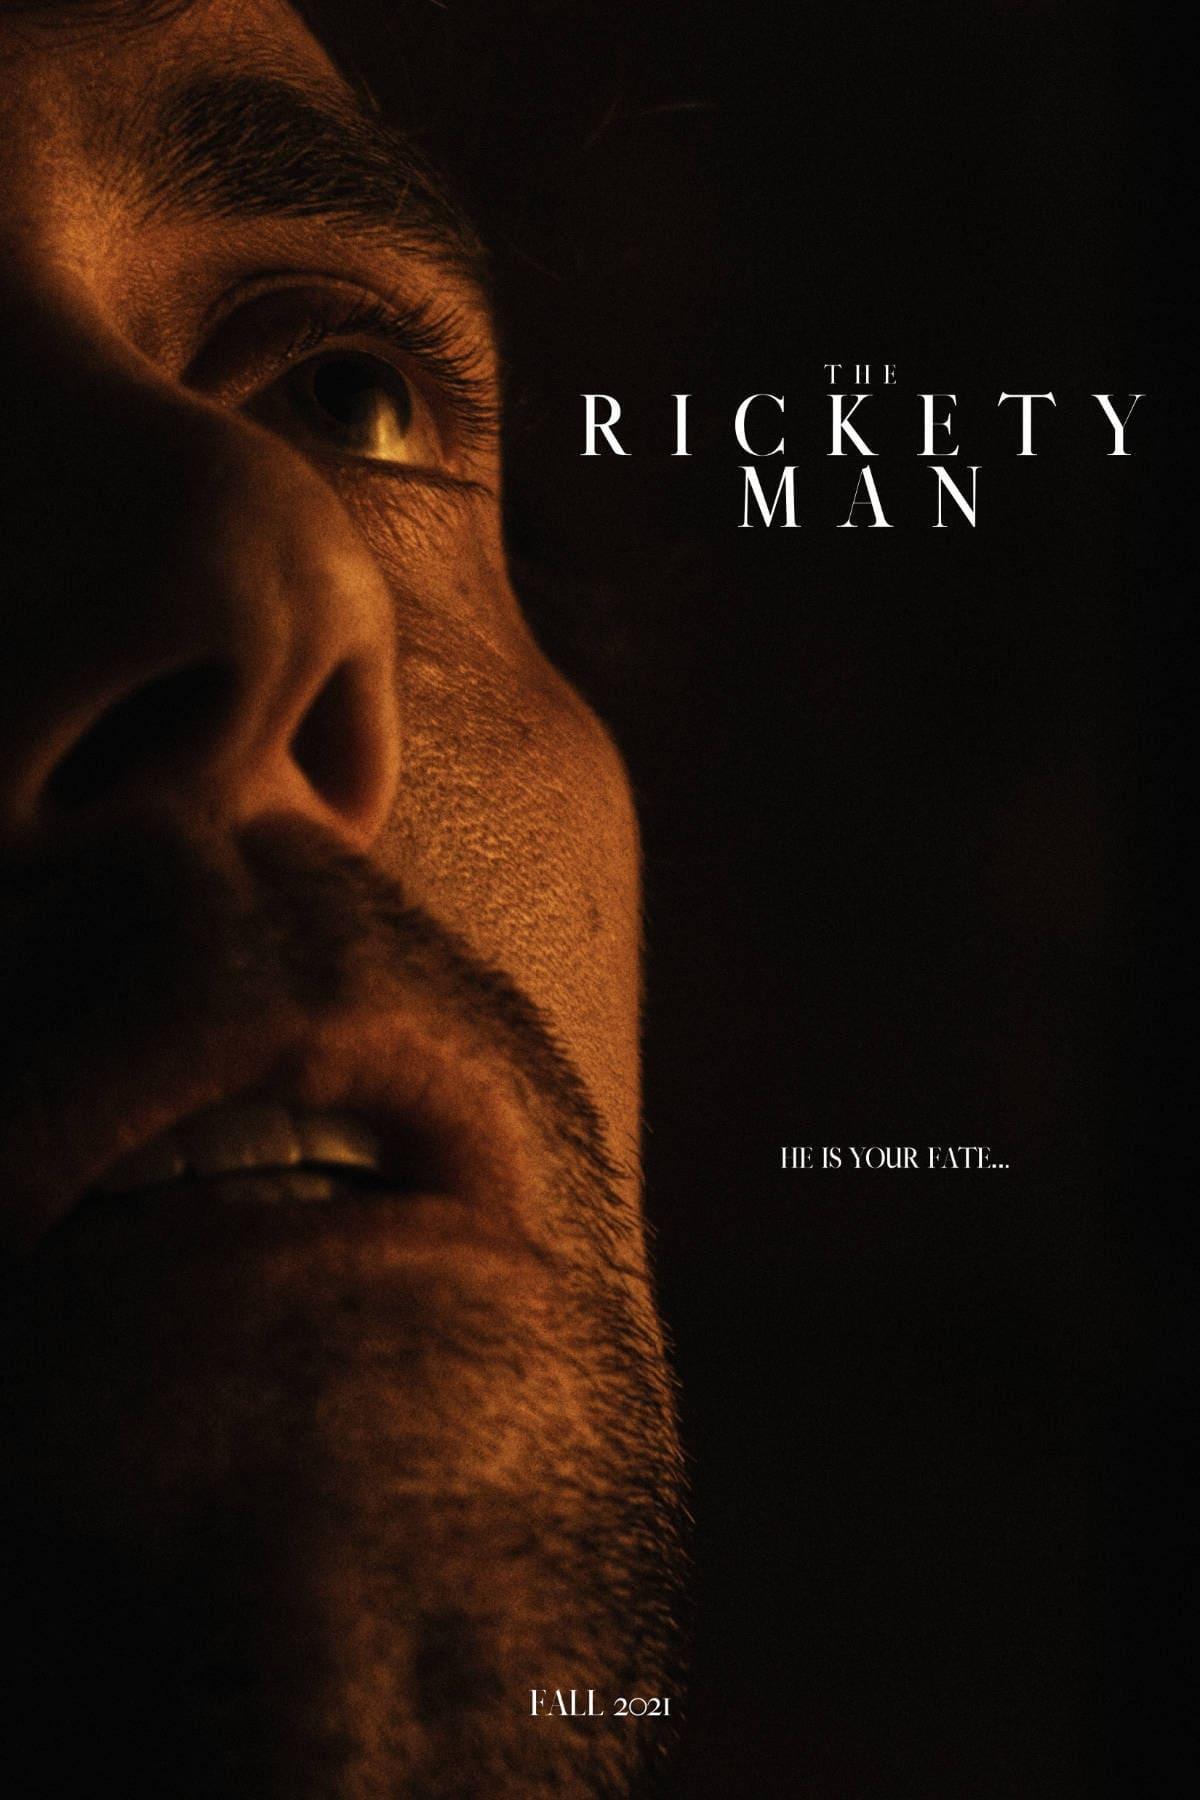 The Rickety Man poster